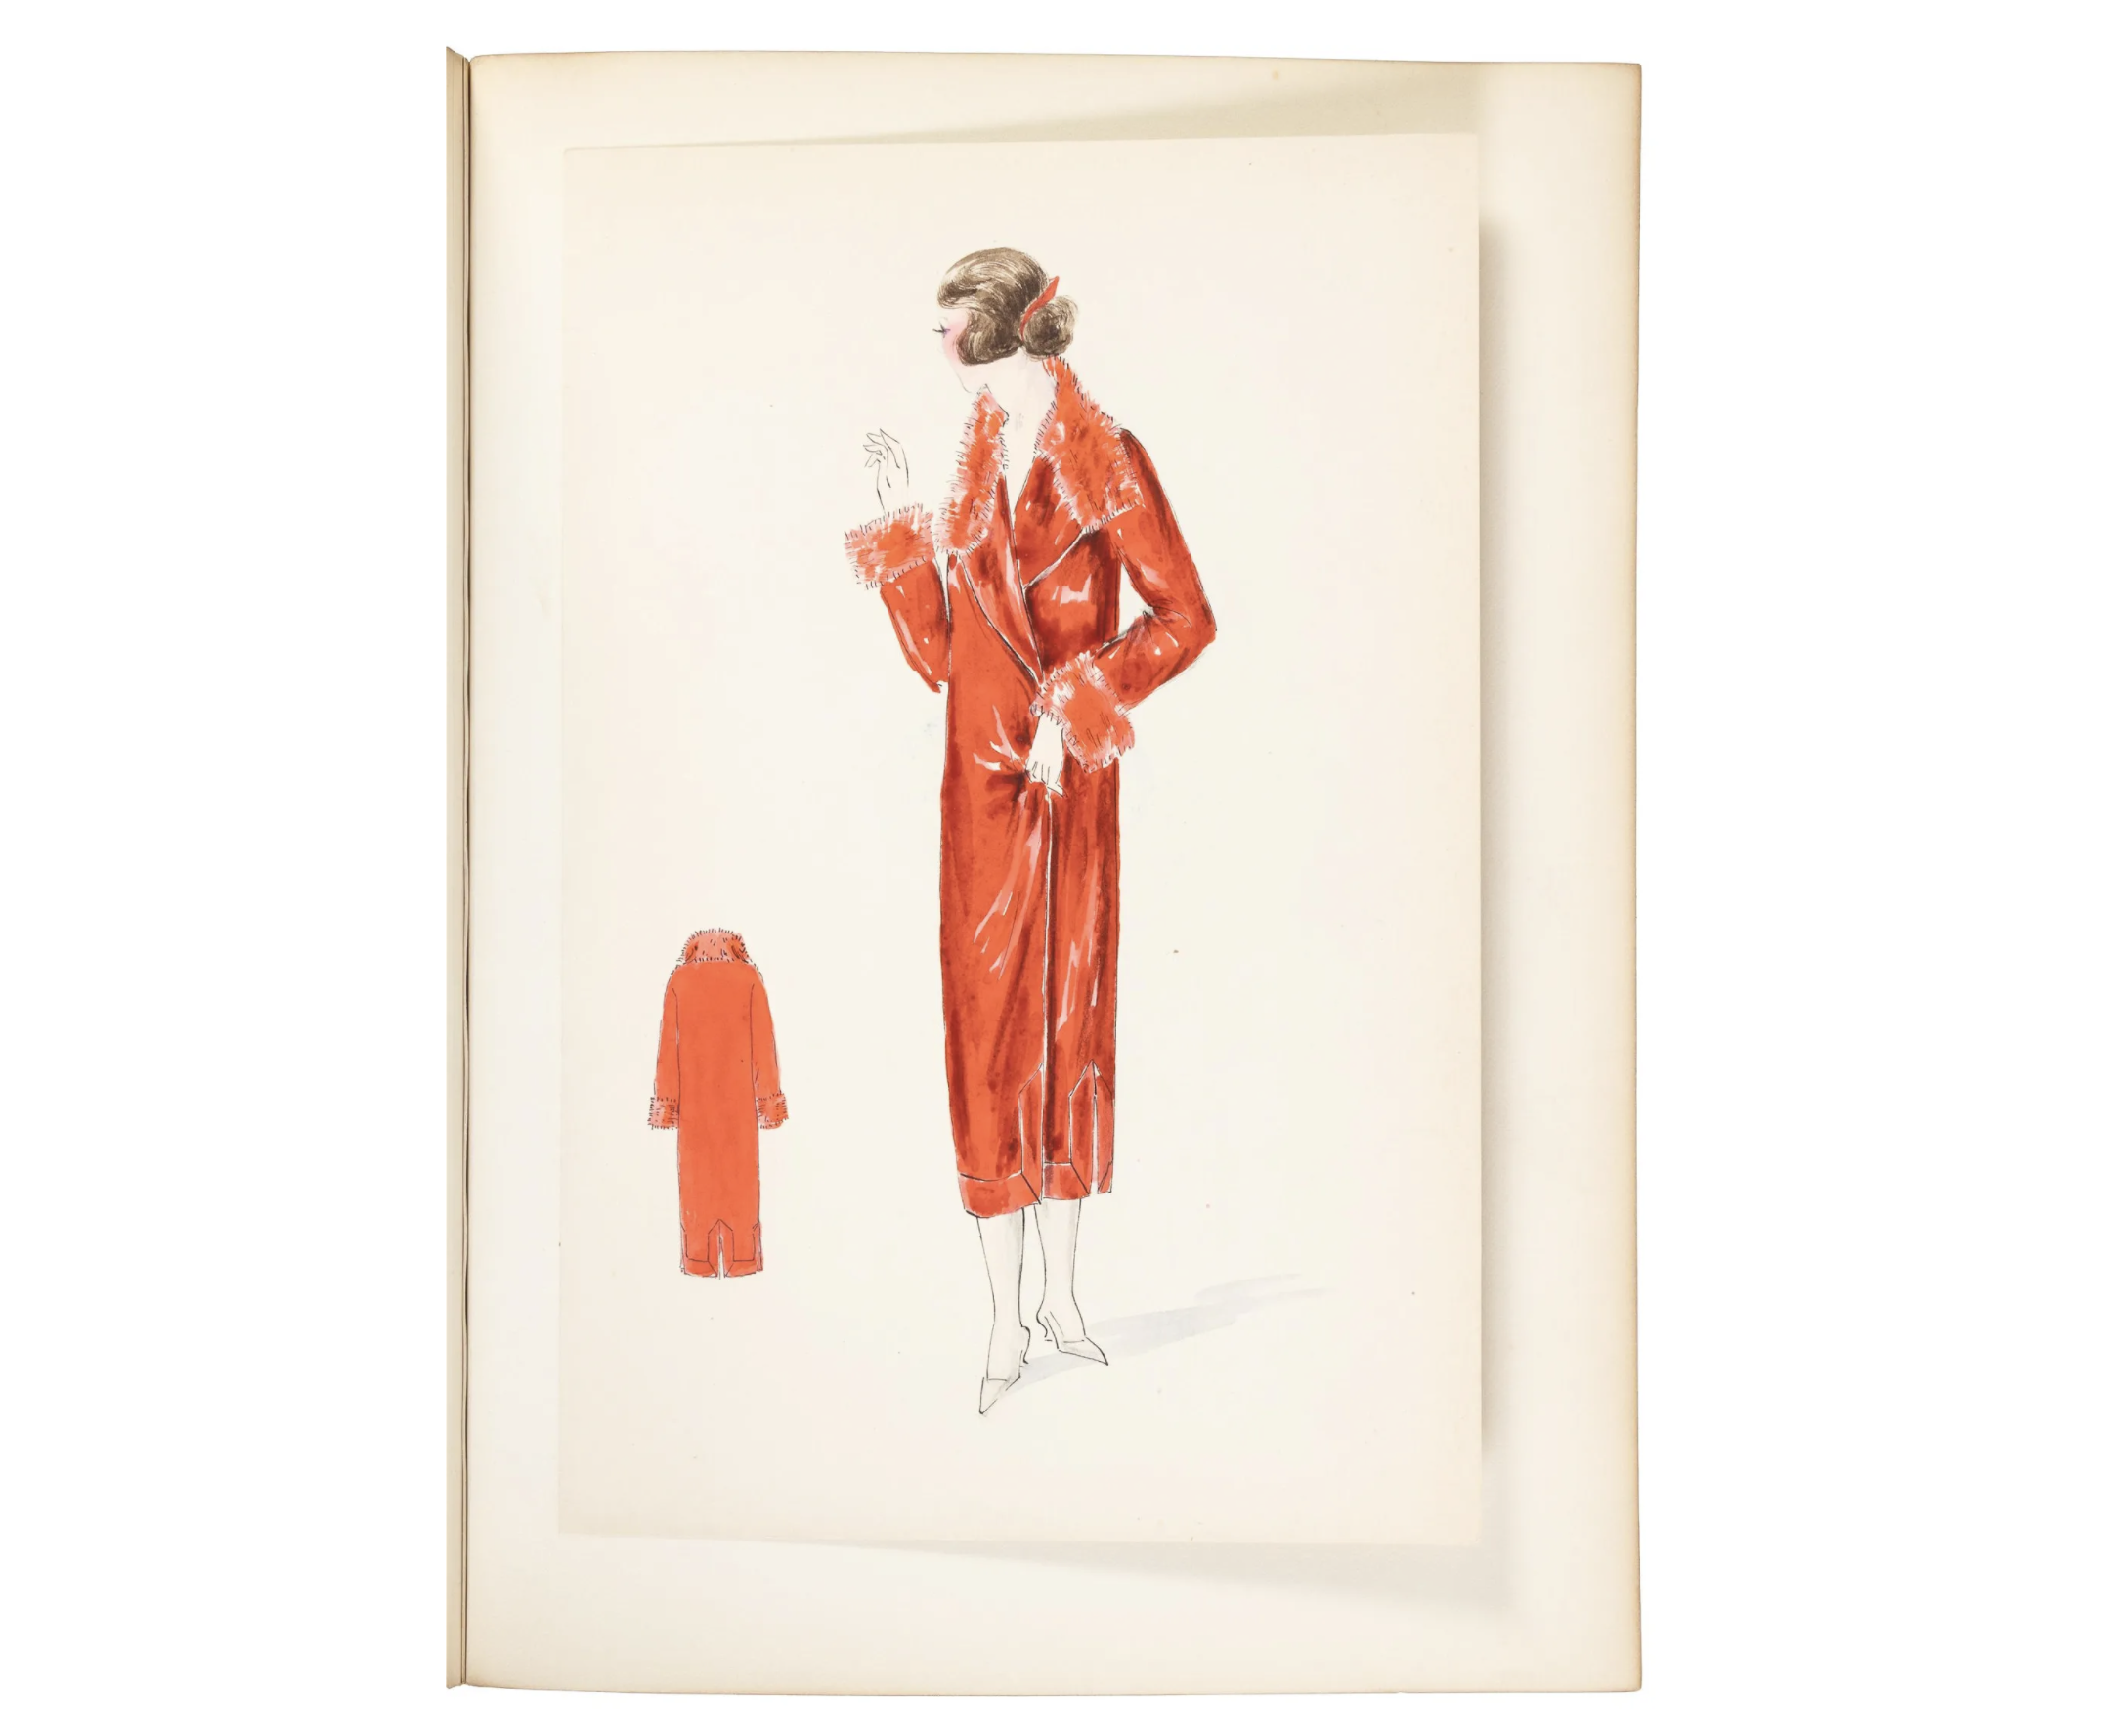 Collection of 1920s fashion designs by Louise Lamotte, est. $4,000-$6,000